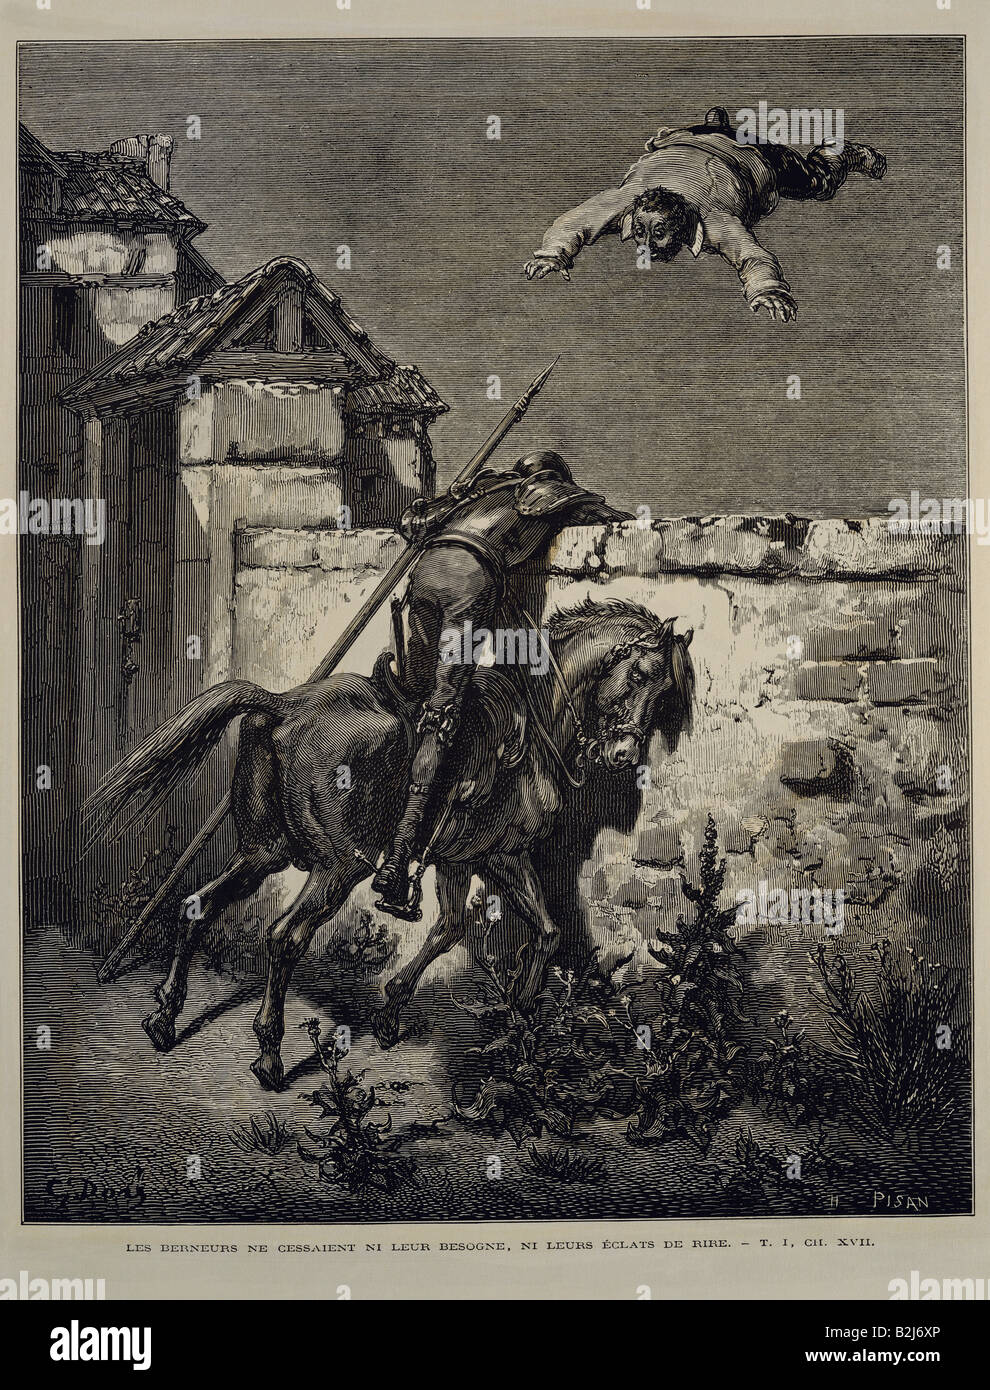 Cervantes y Saavedra, Miguel de, 1547 - 23.4.1616, Spanish author / writer, works, 'Don Quixote', 1605 - 1615, illustration, 'Don Quixote riding against a wall', wood engraving, by Gustave Dore, Paris, France, 1863, Artist's Copyright has not to be cleared Stock Photo